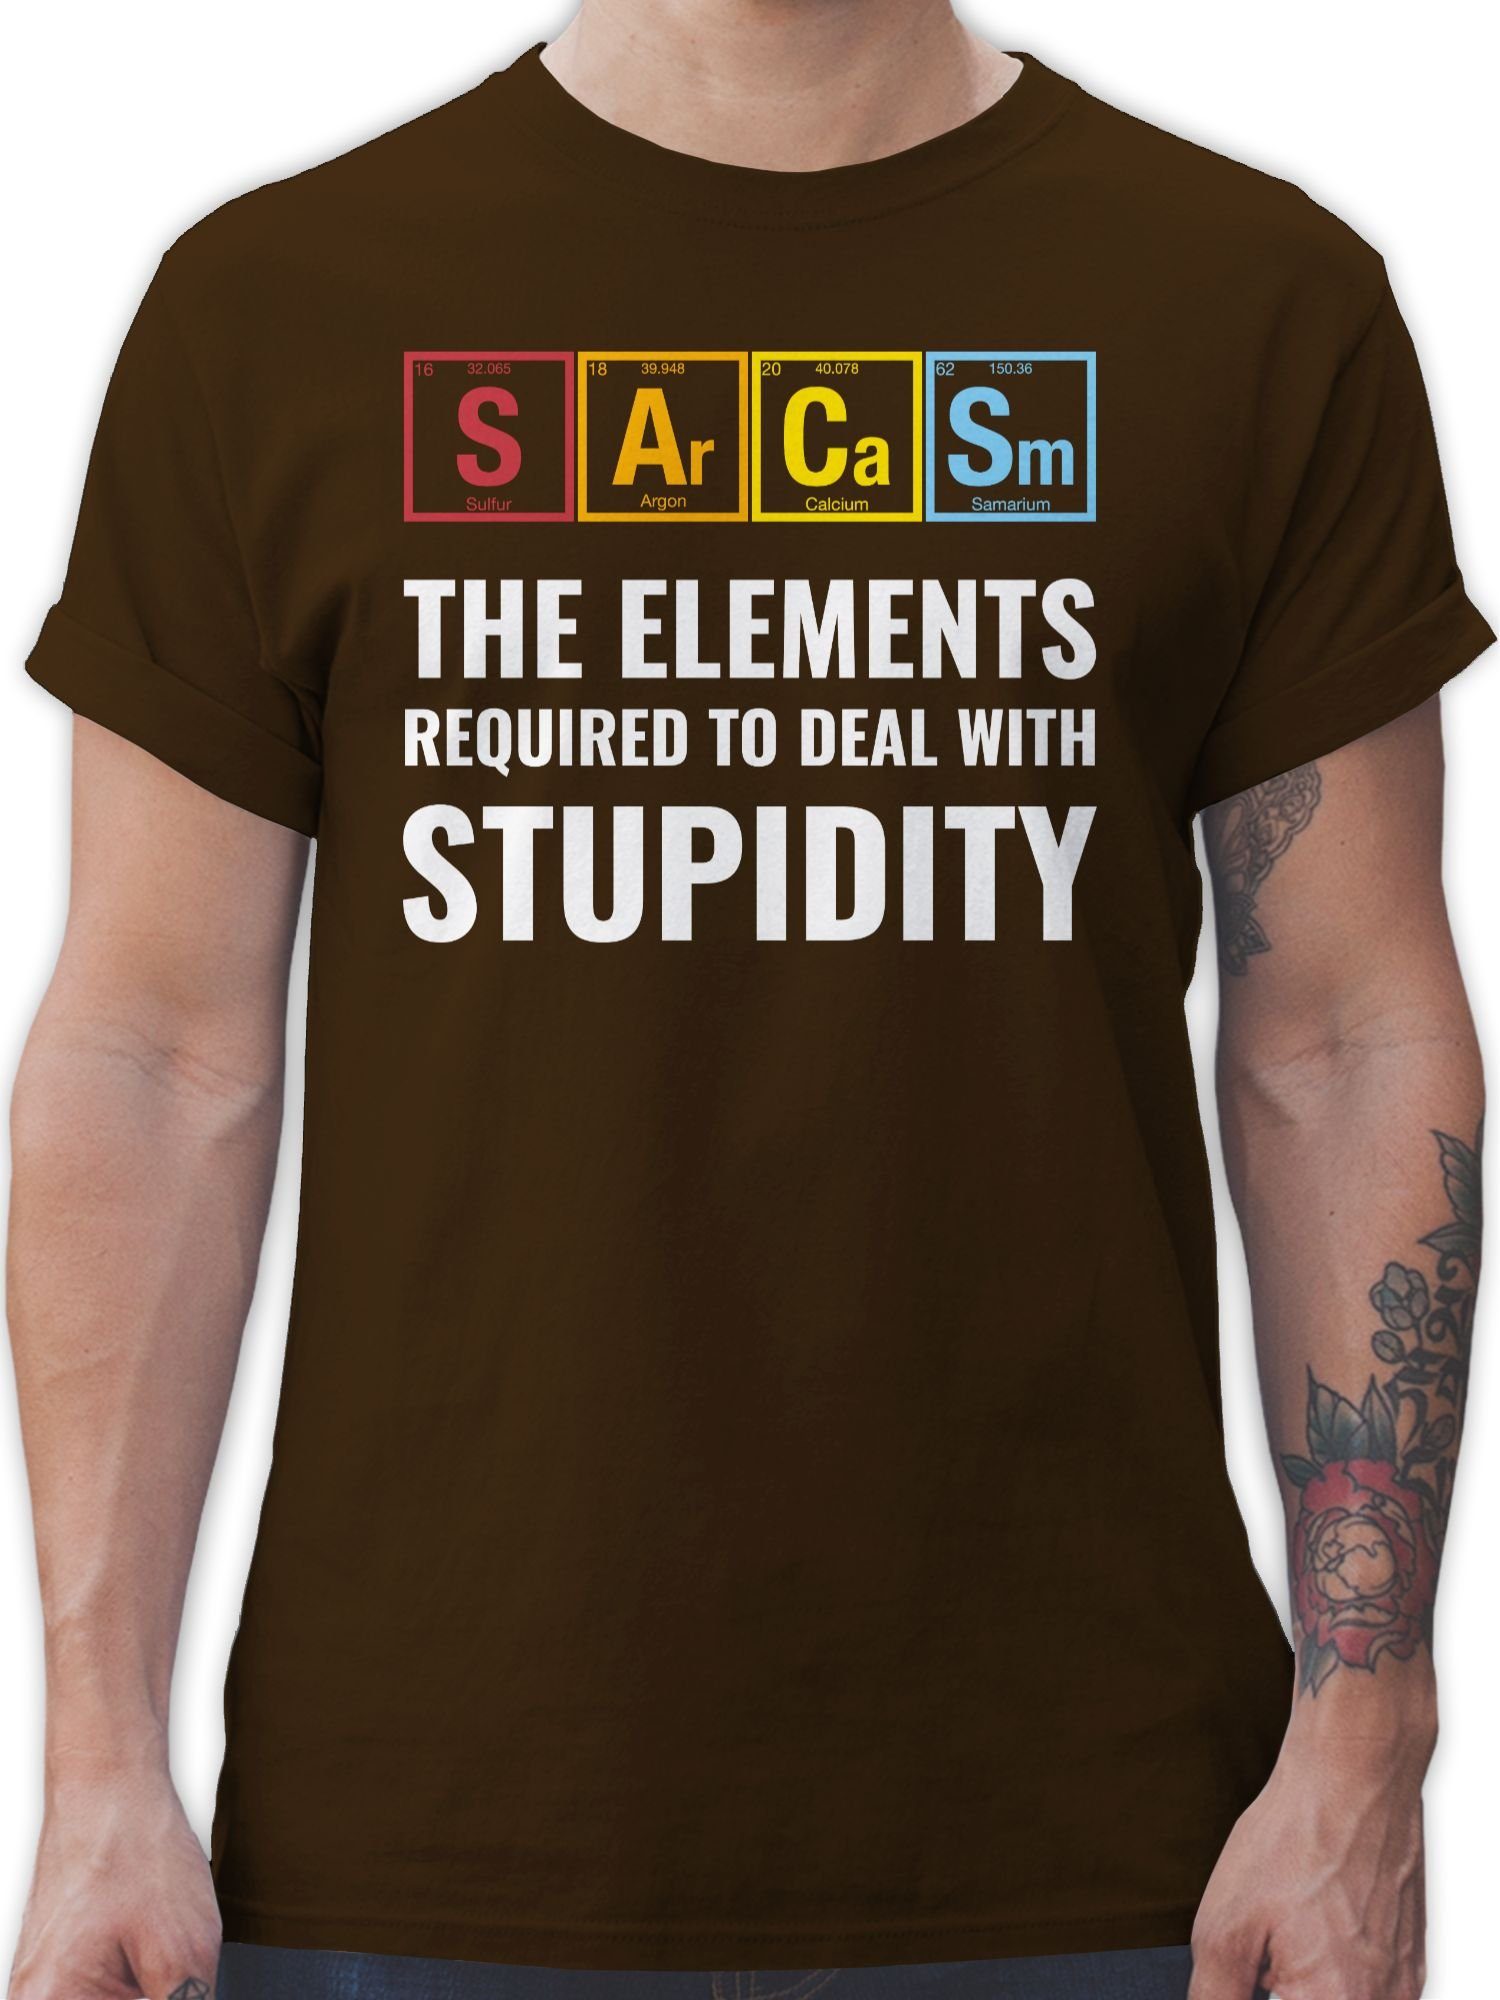 Braun Shirtracer - stupidity the to T-Shirt 02 with Geschenke required elements Nerd deal Sarcasm